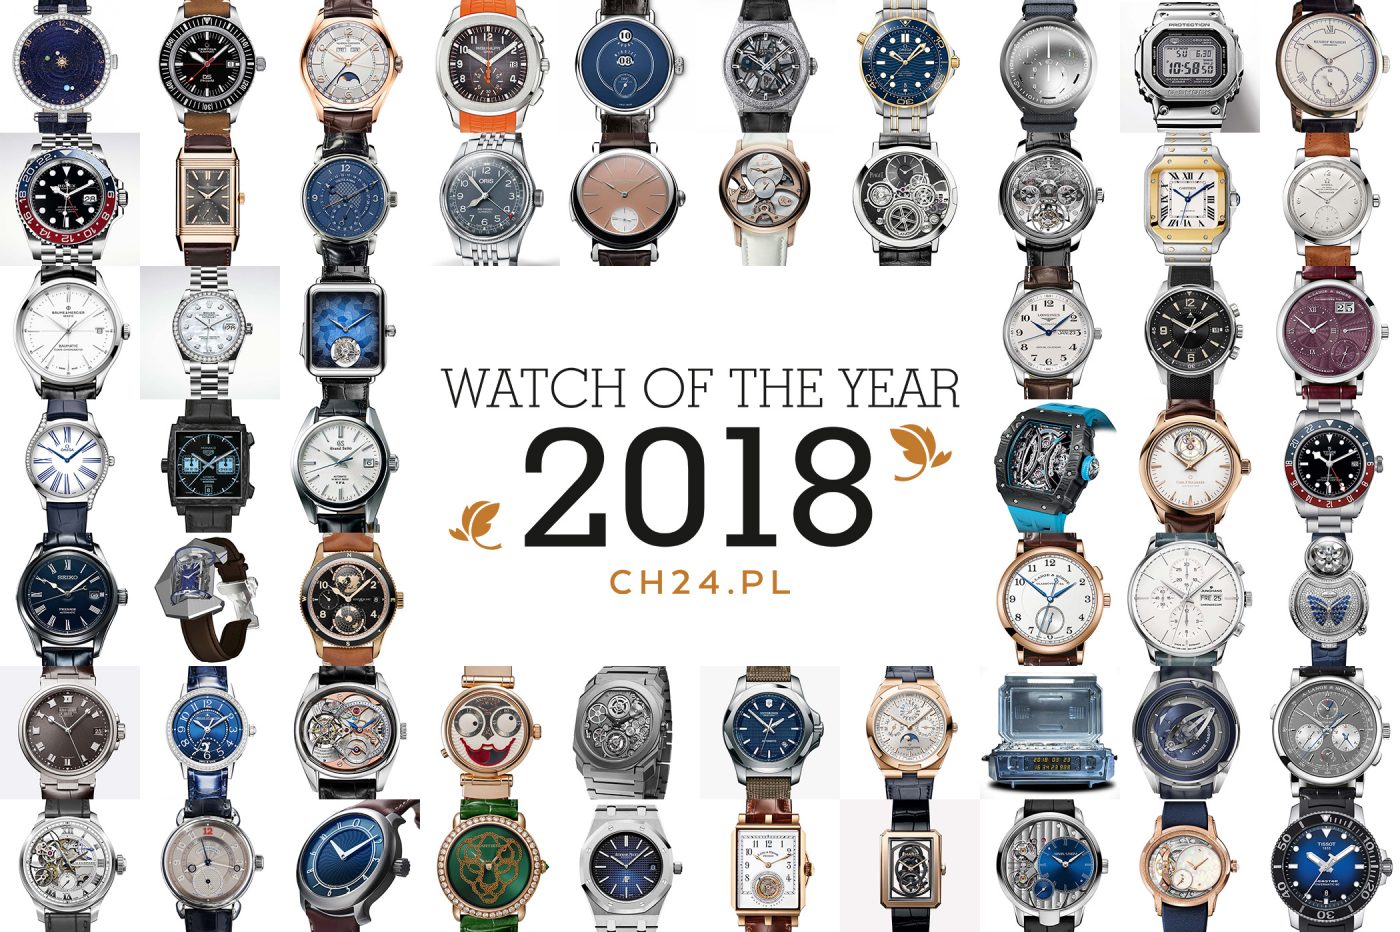 WATCH OF THE YEAR 2018